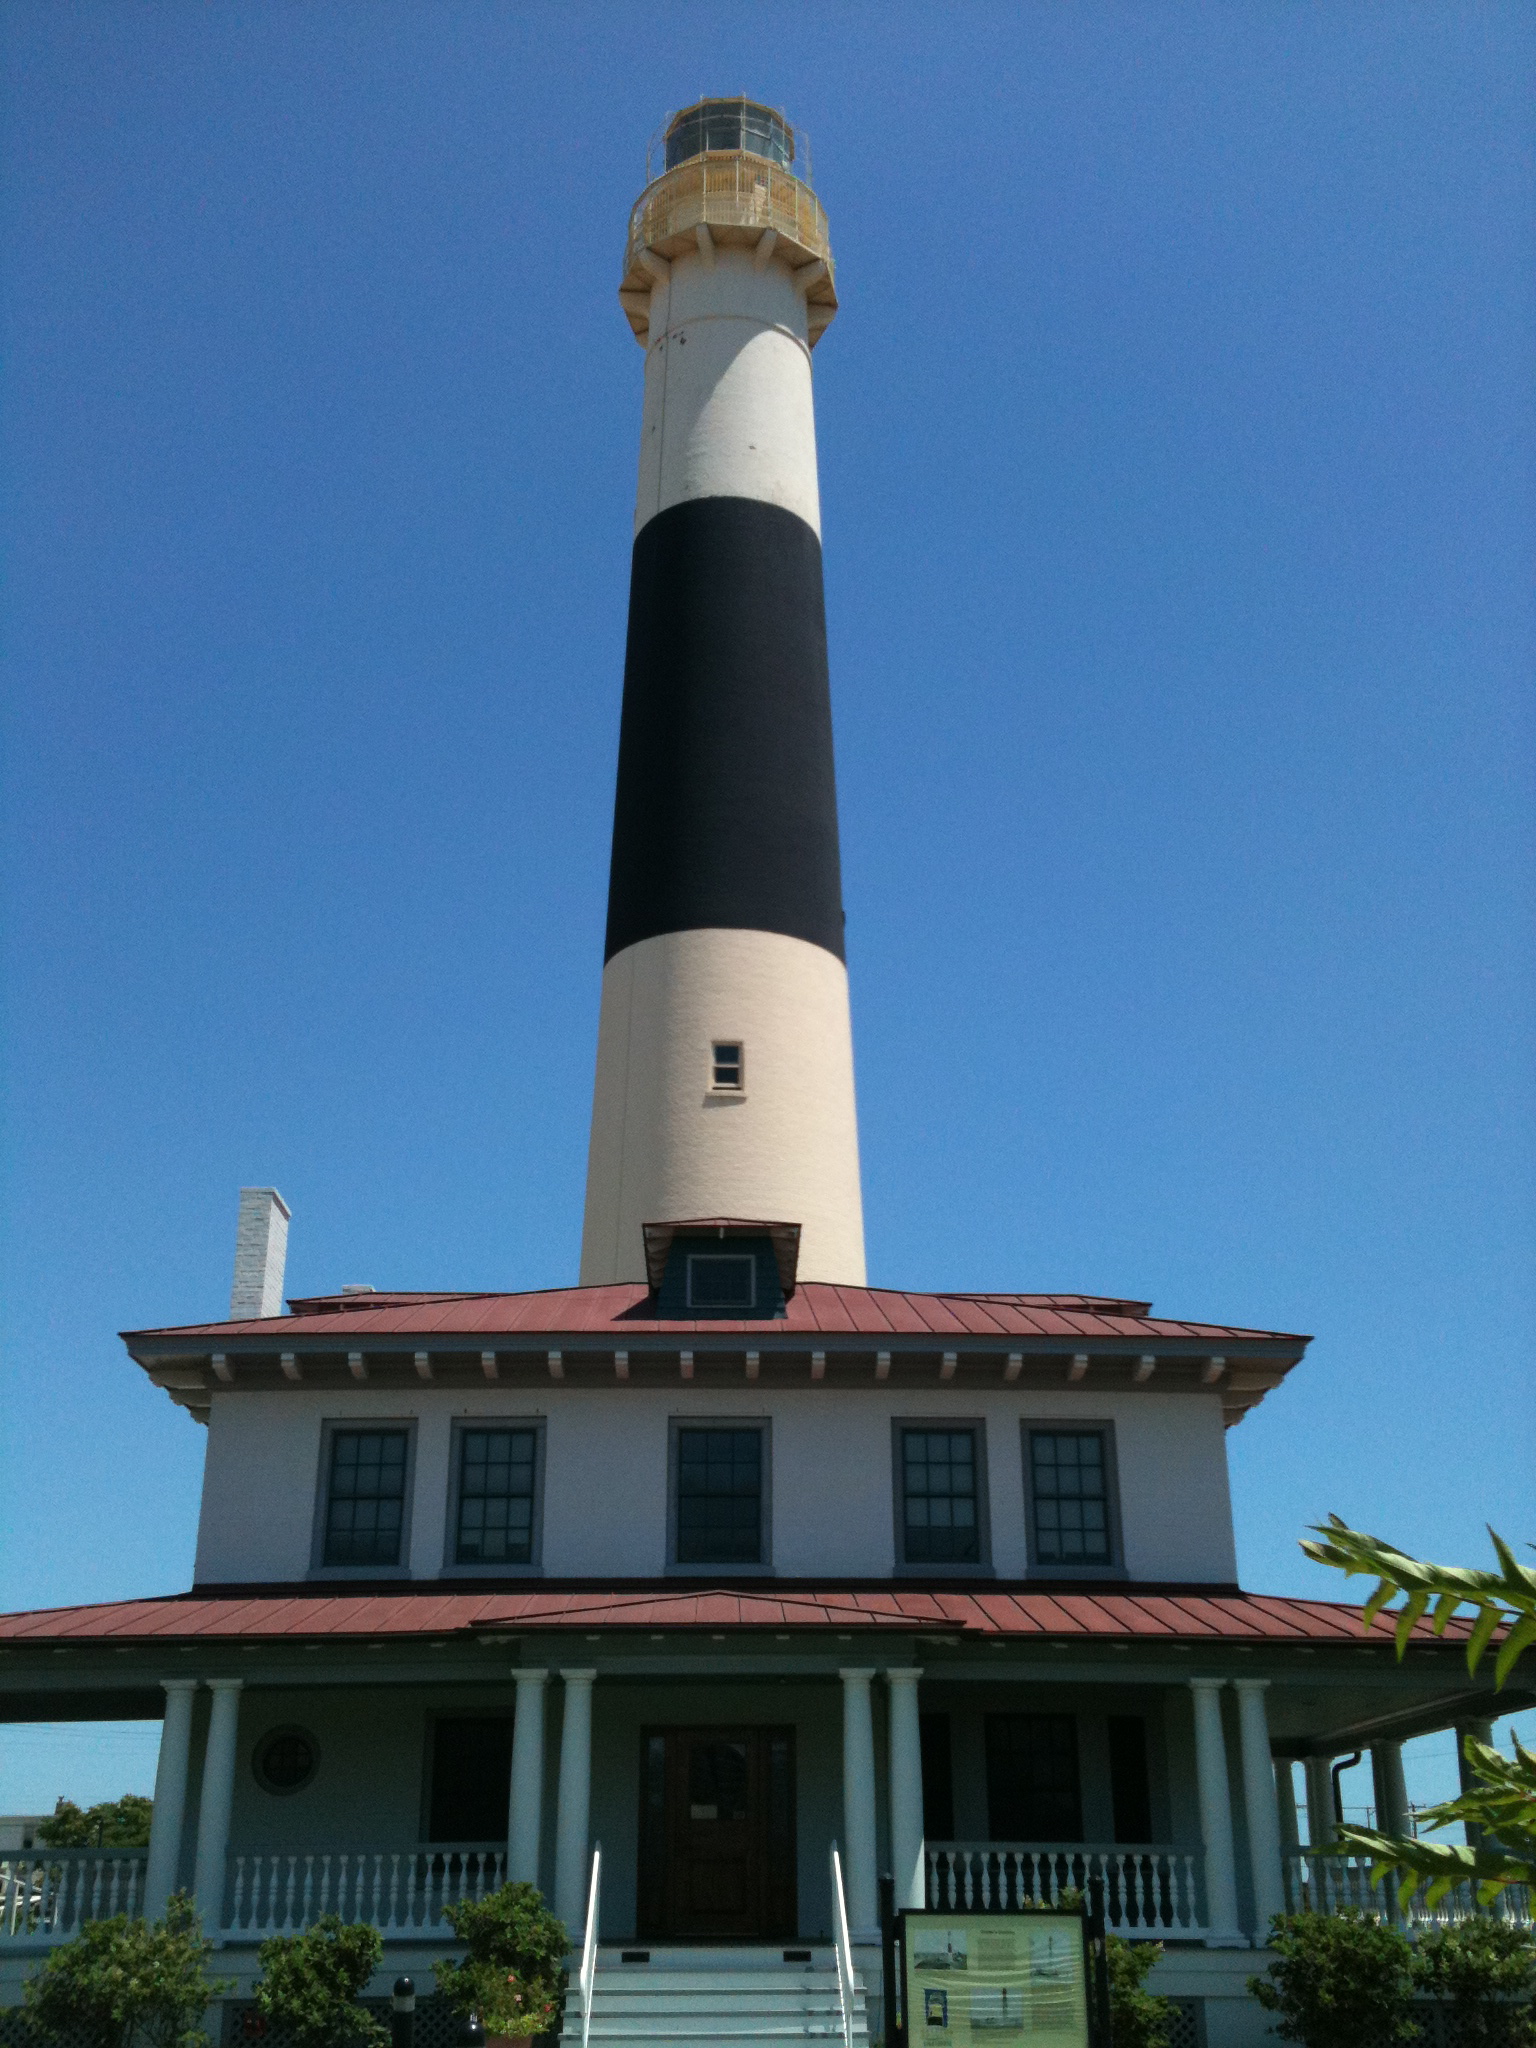 Abseecon Lighthouse